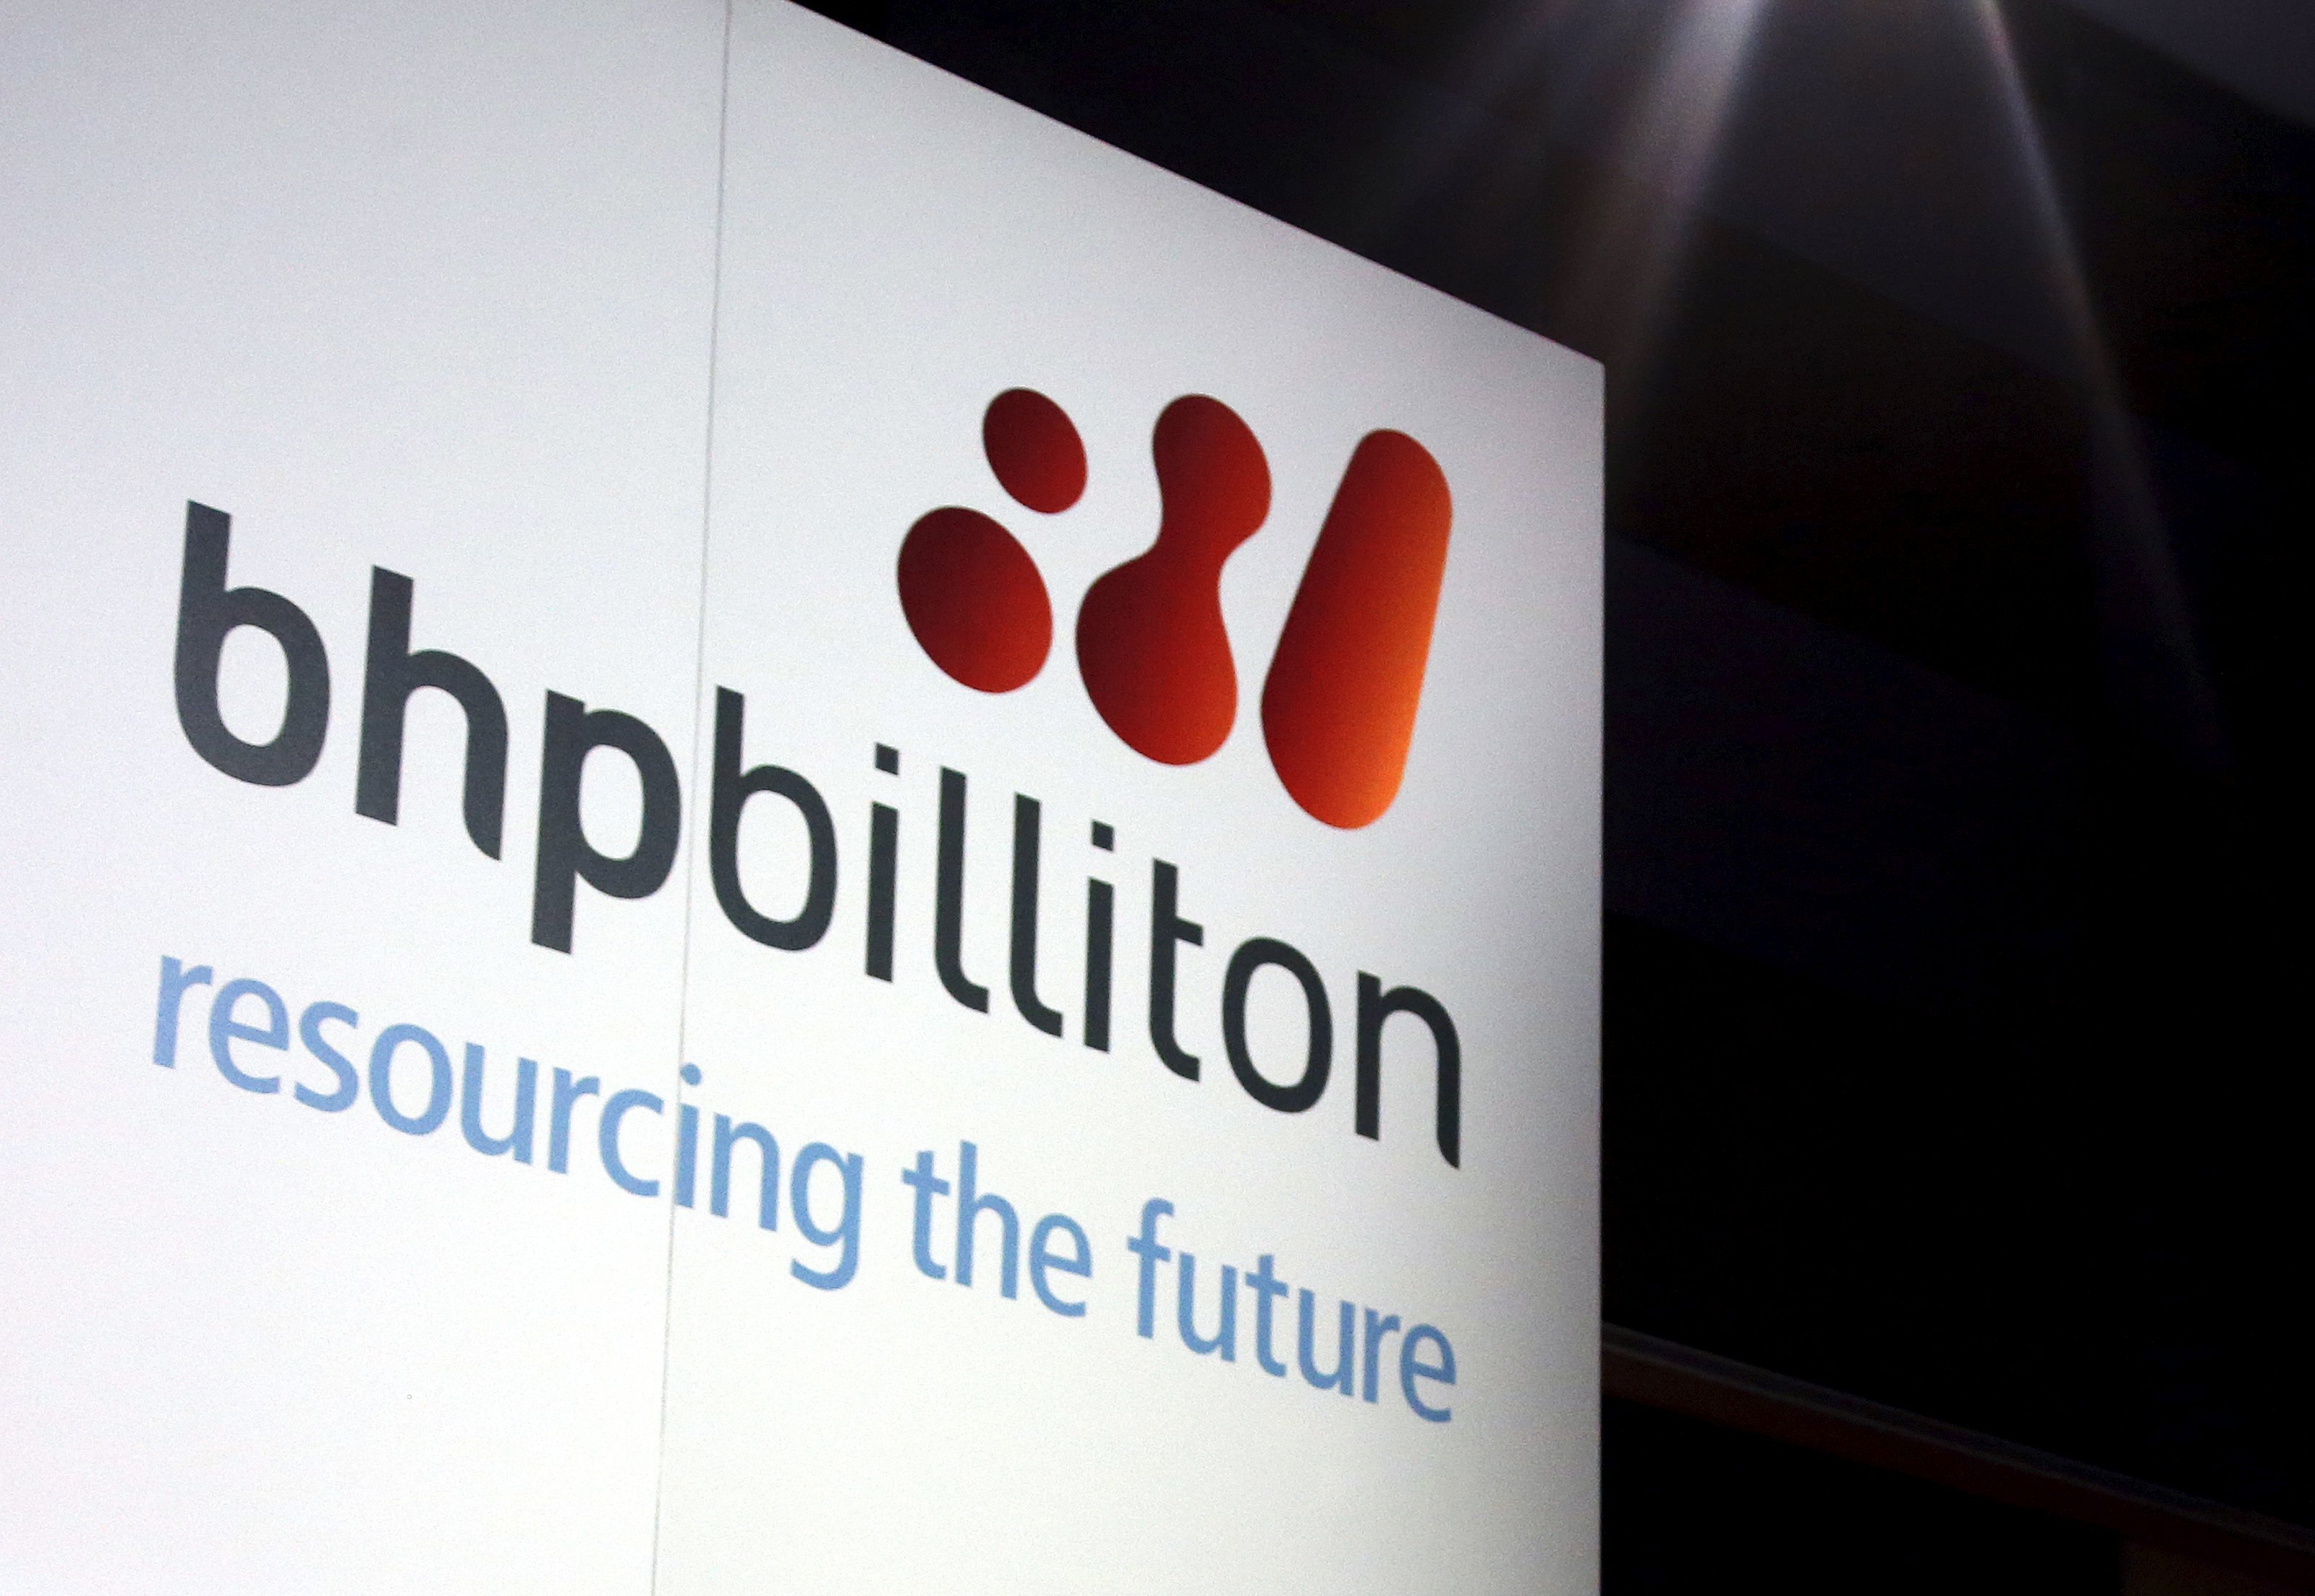 The logo of leading miner BHP Billiton, whose chief executive warned against a probe into the iron ore industry by Australia as likely turning off major customer China. Photo: Reuters